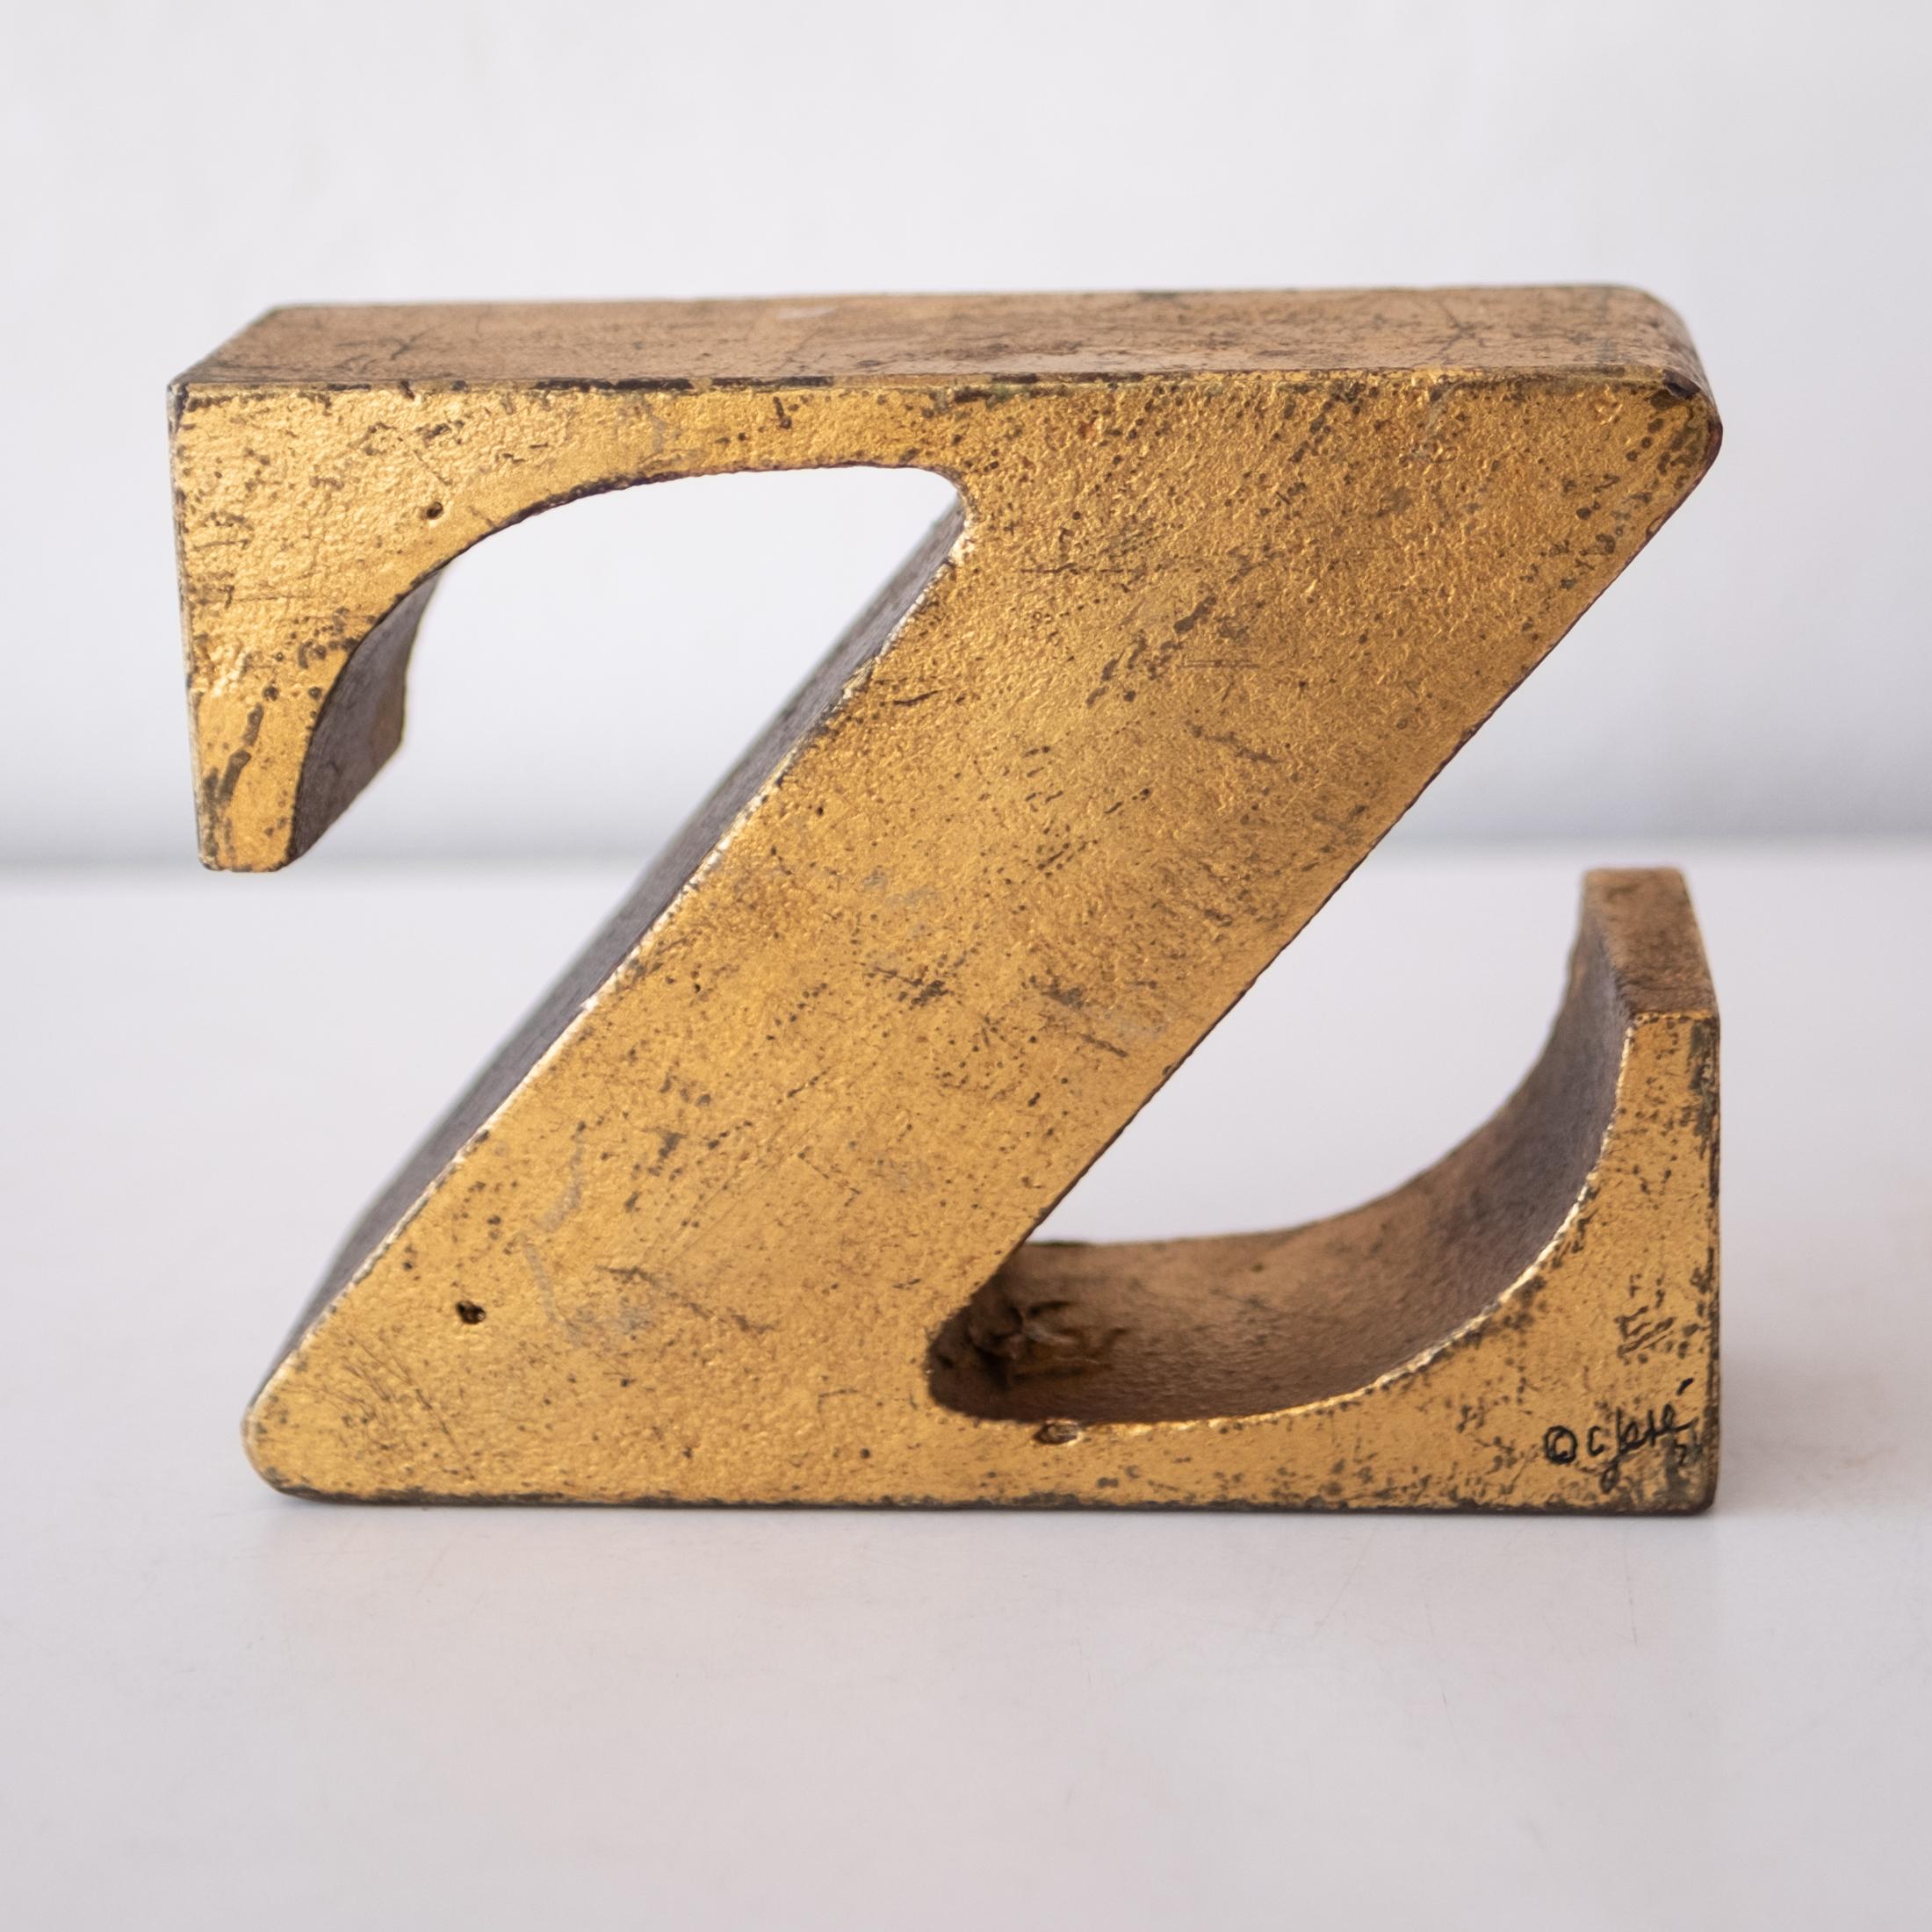 Solid iron midcentury Z Curtis Jere bookend with gold leaf finish.  Signed and dated 